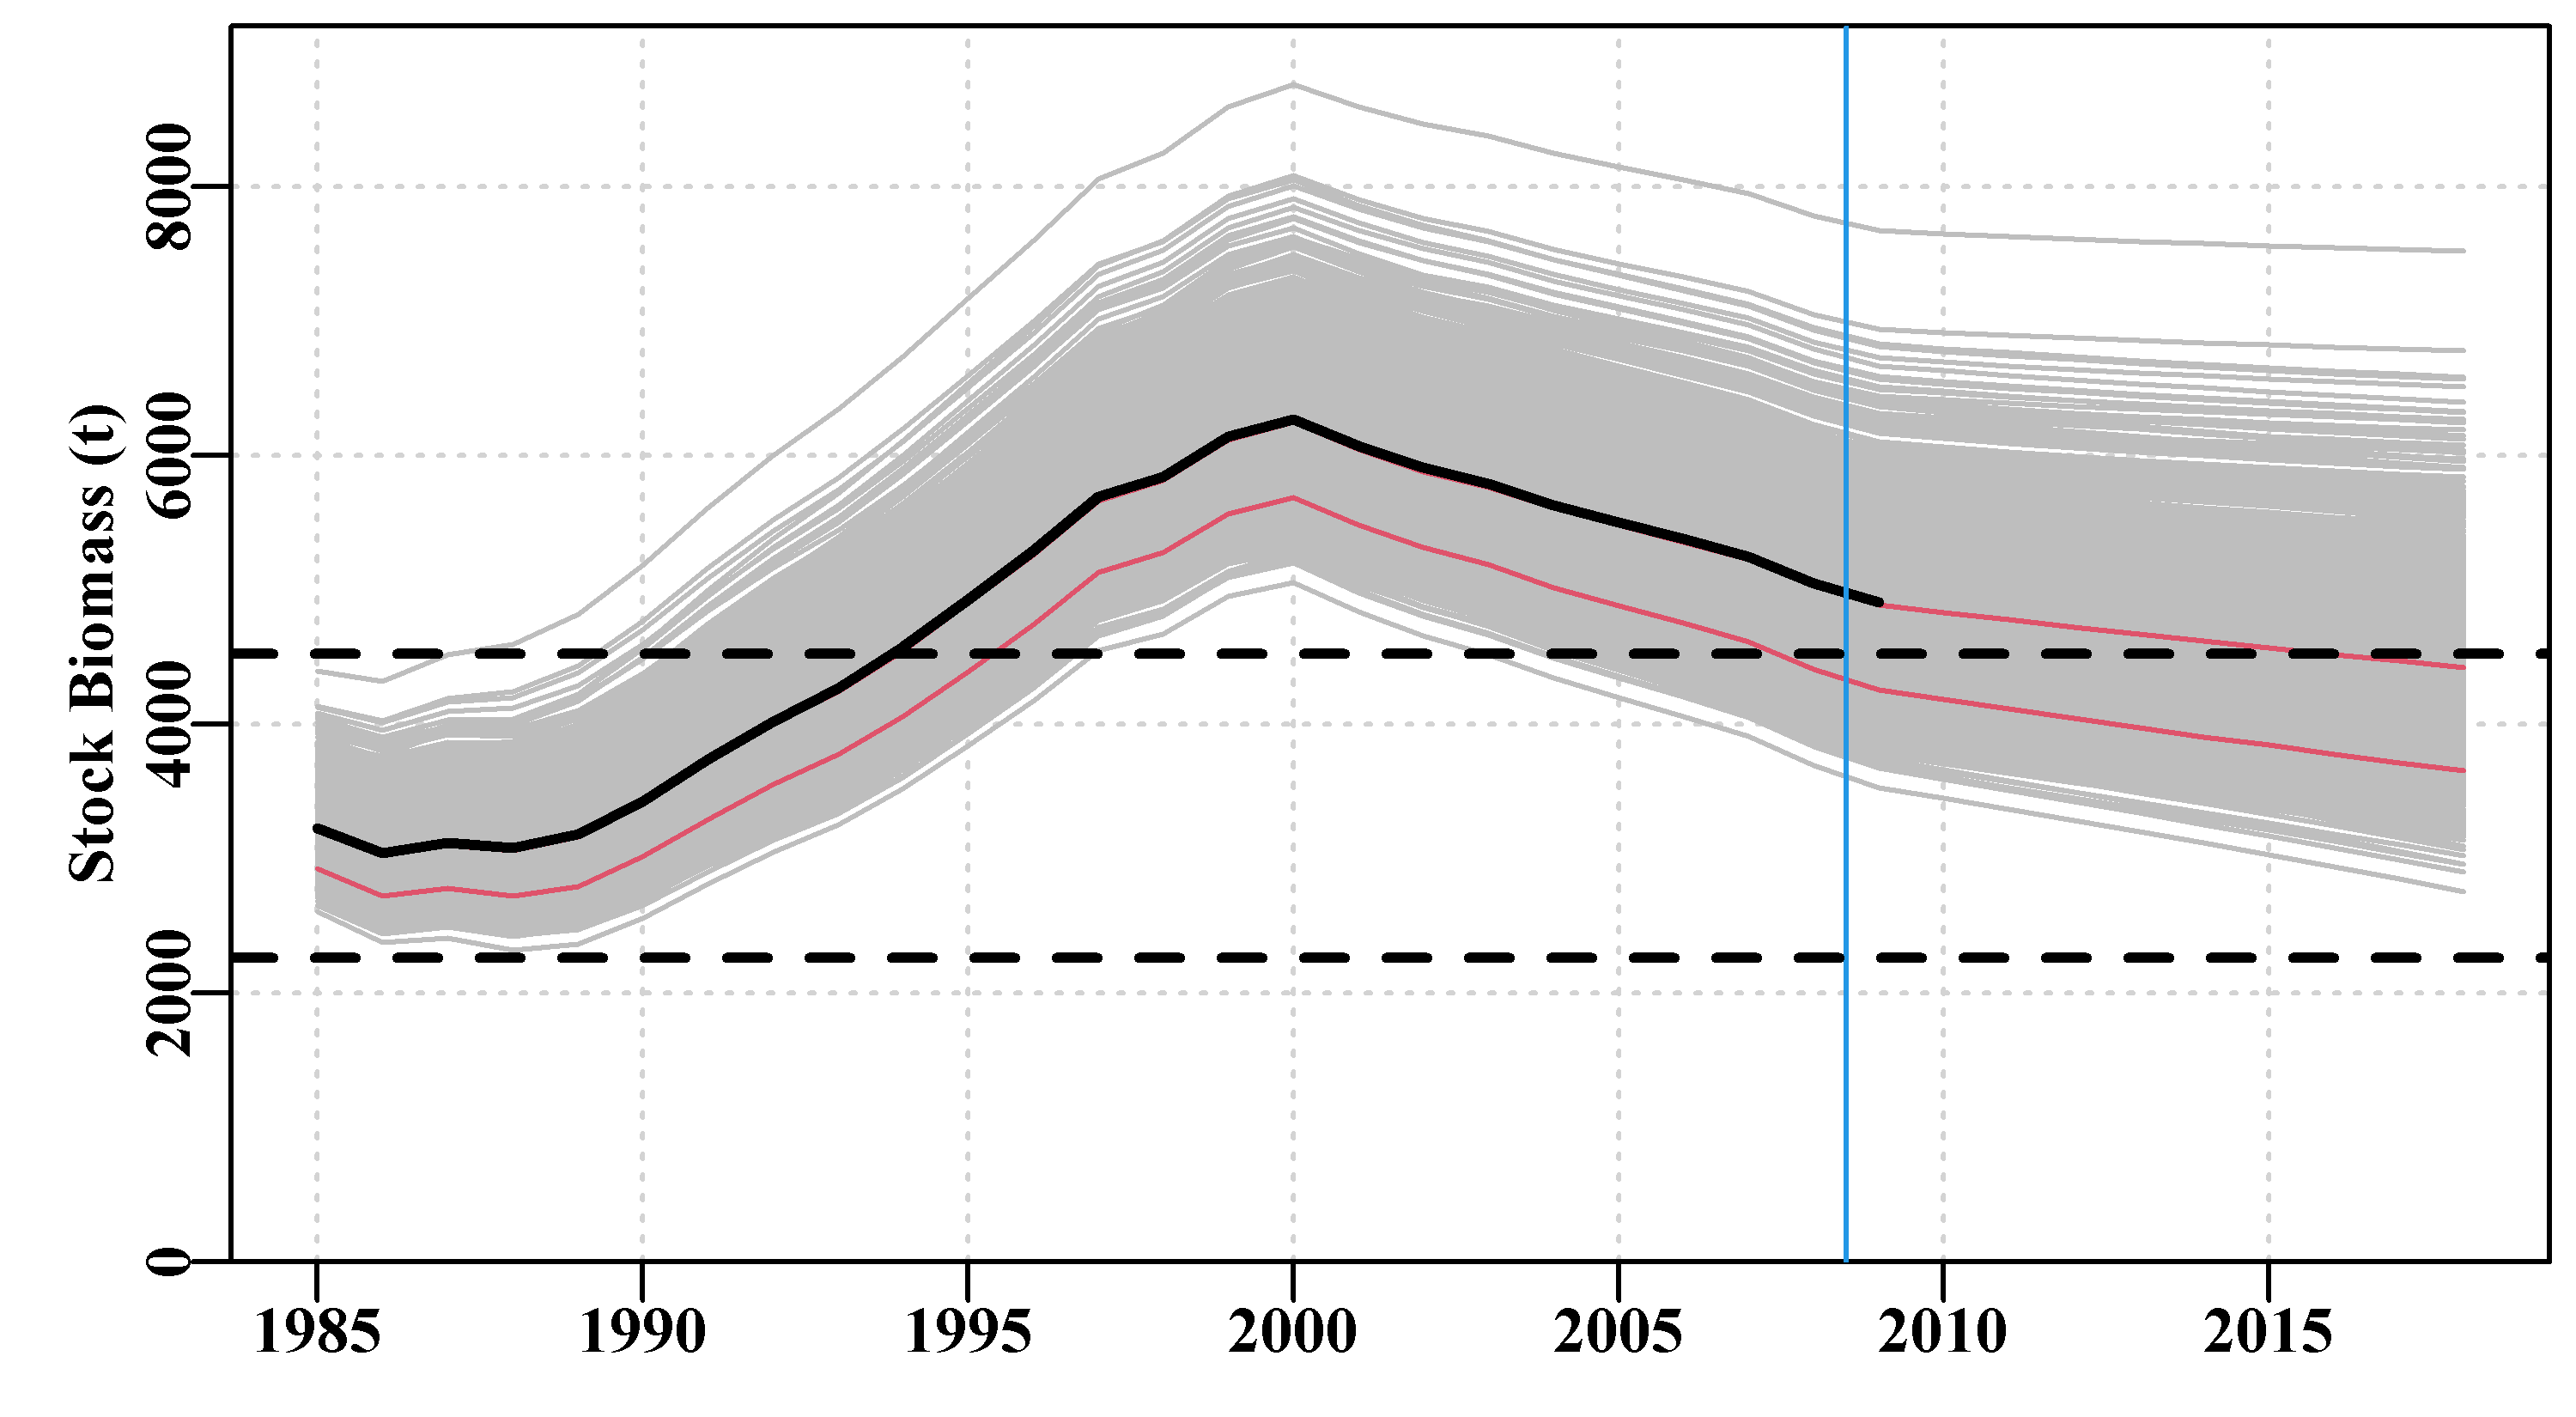 1000 projections (in grey) derived from the using a bootstrap process to generate 1000 plausible parameter vectors and projecting each vector forward with the fisheries catches followed by 10 years of a constant catch of 900t. The dashed lines are the limit and target reference points. The blue vertical line is the limit of fisheries data, the thick black line is the optimum fit and the red lines are the 10th and 50th quantiles across years.